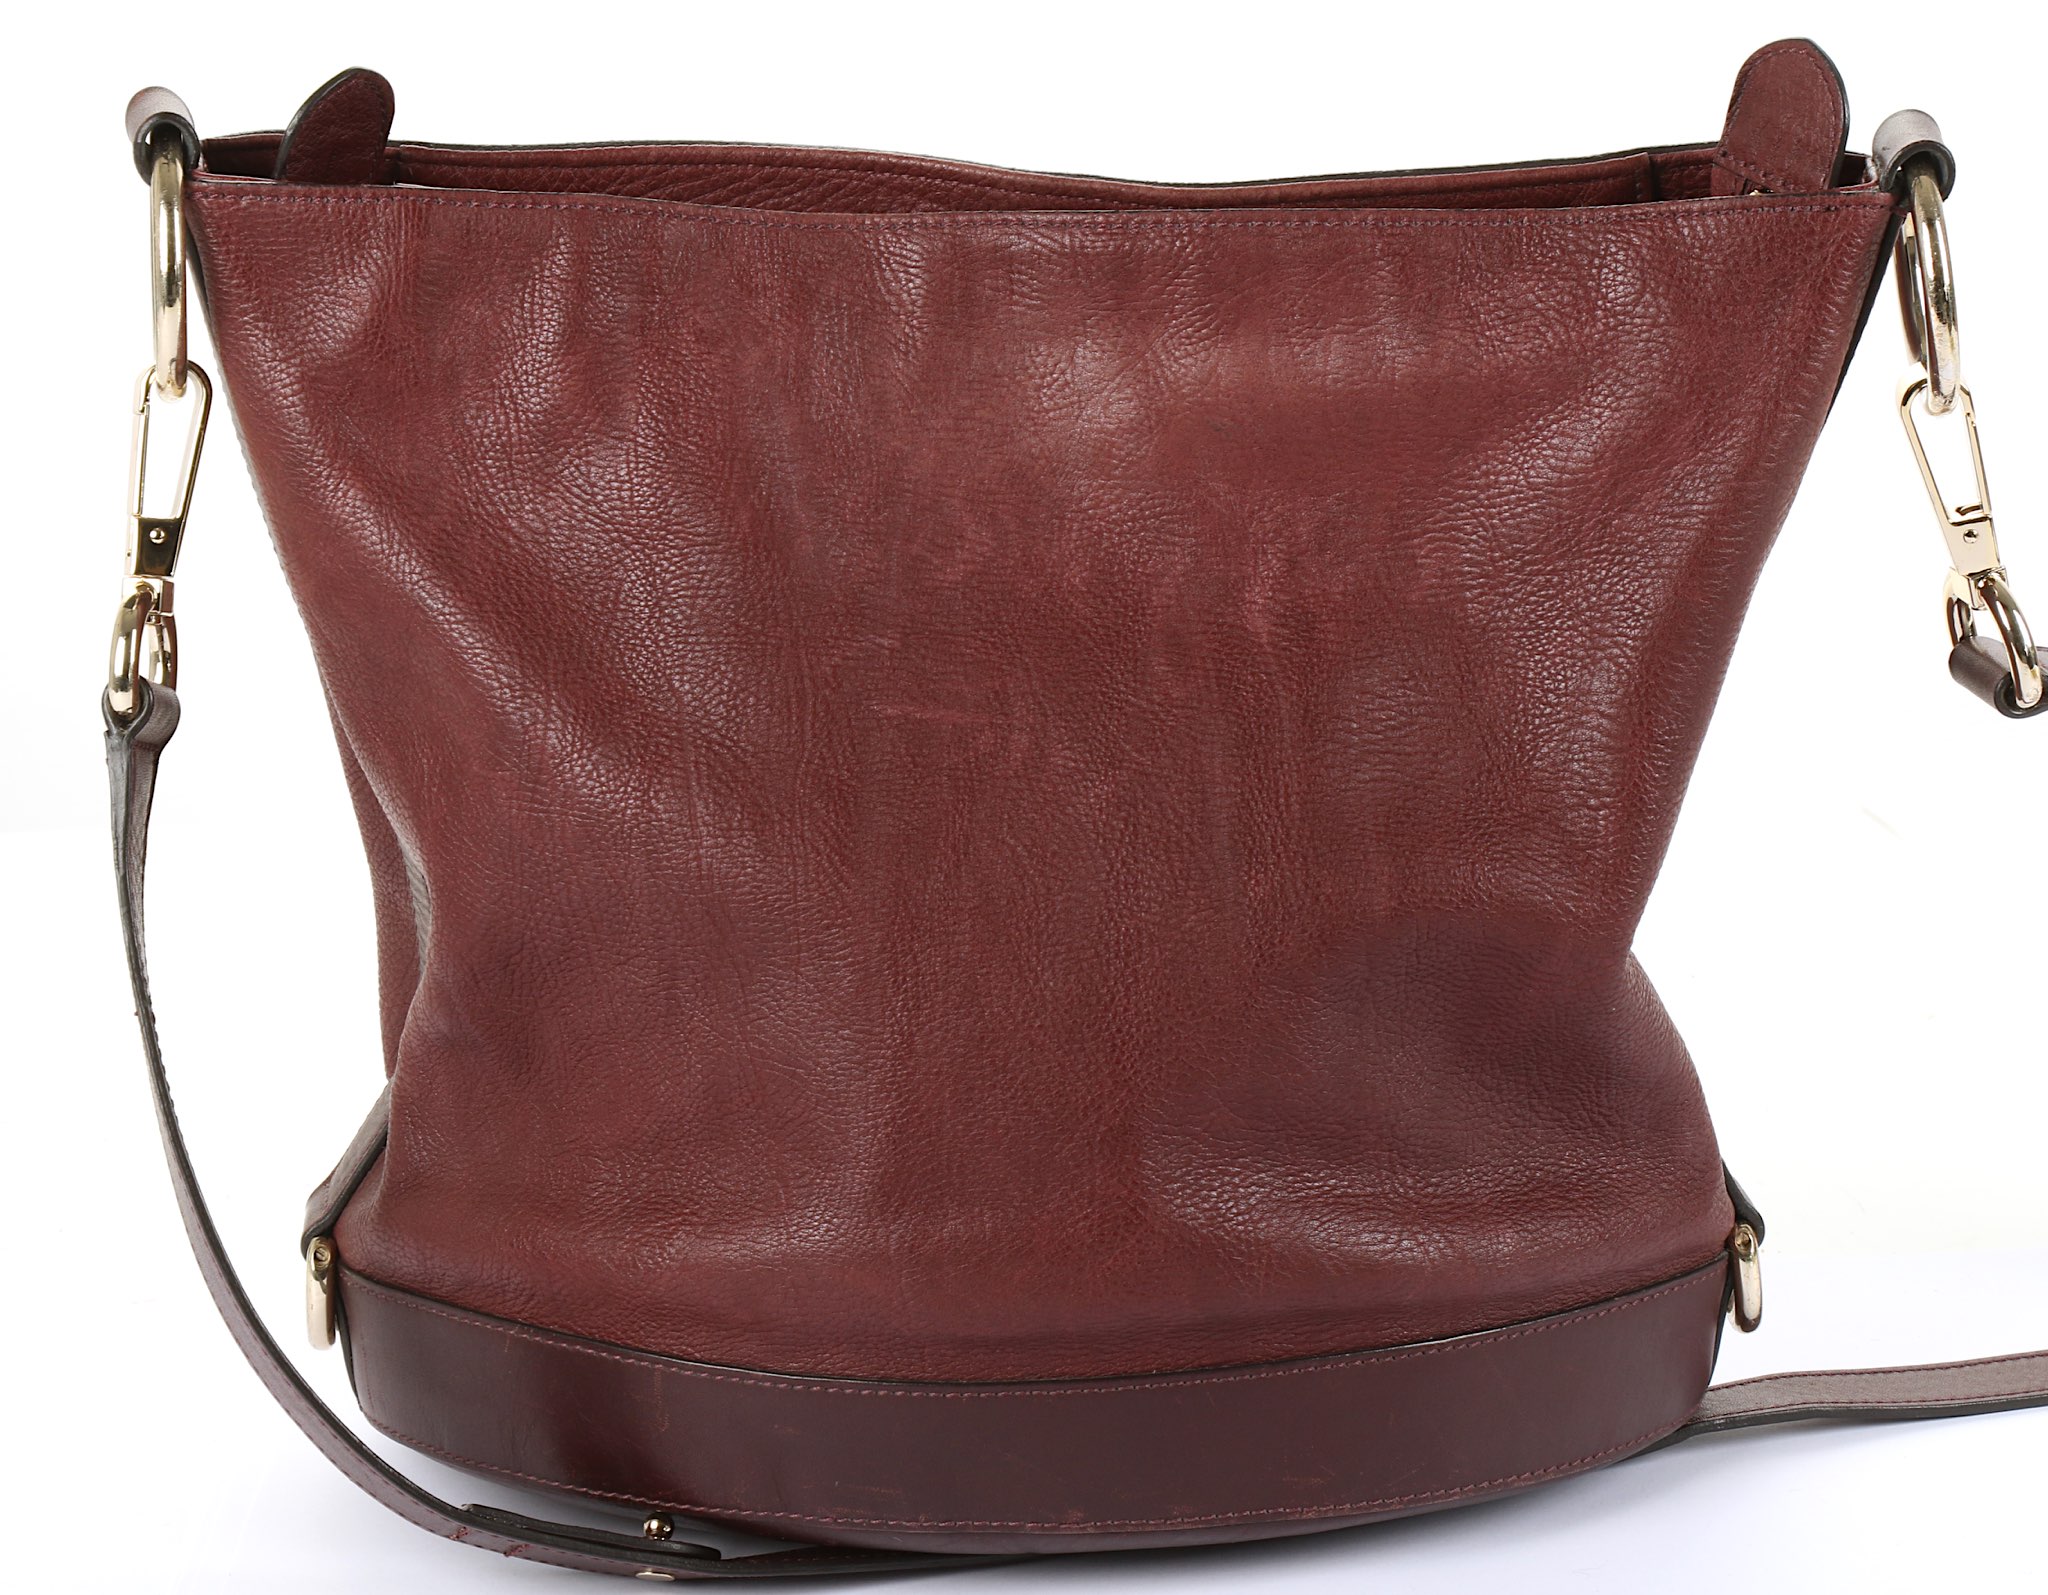 Mulberry Oxblood Jamie Bag, washed oxblood leather - Image 5 of 6